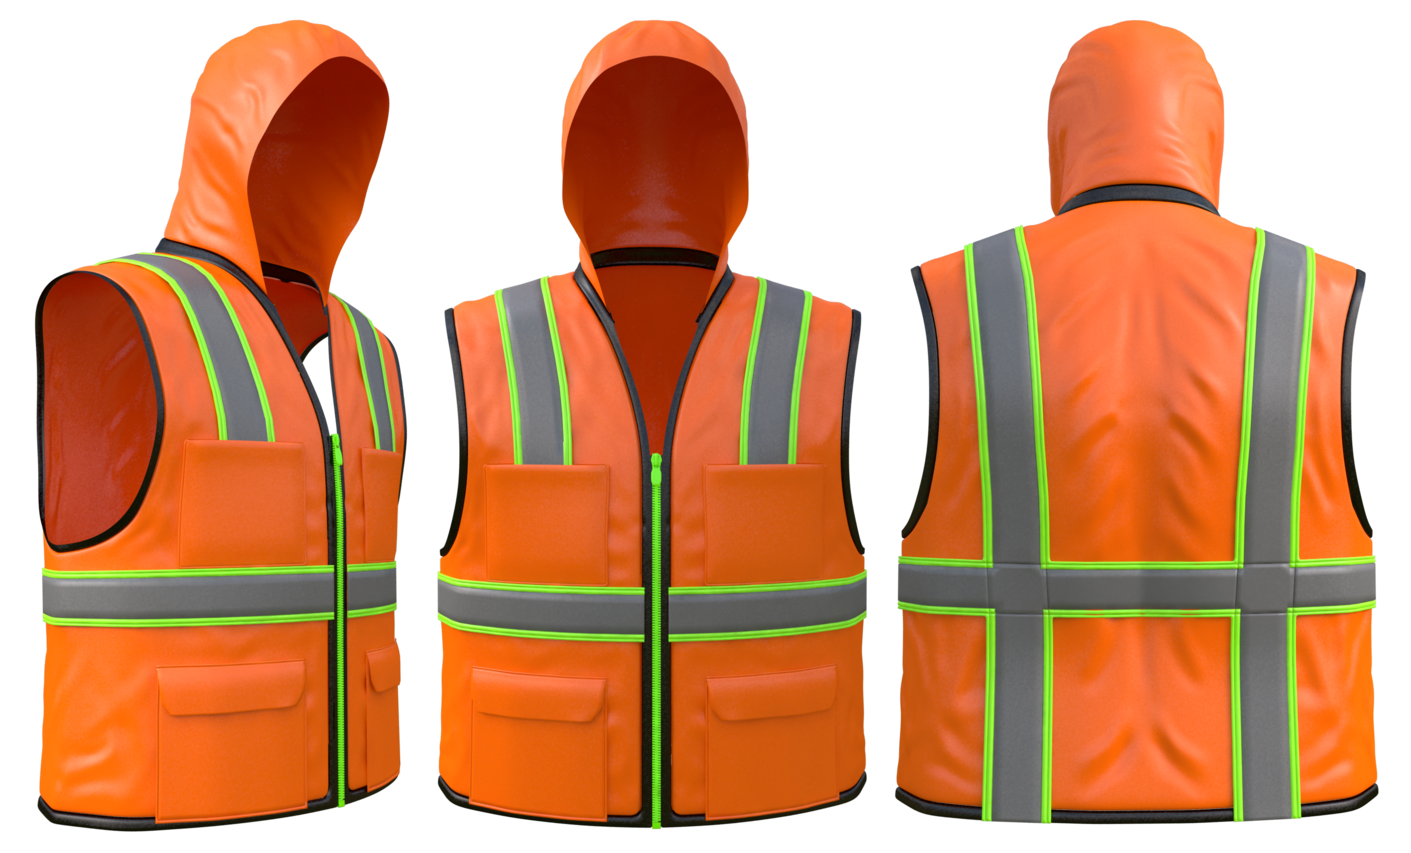 This invention addresses this issue by adding a hood to a standard safety vest.